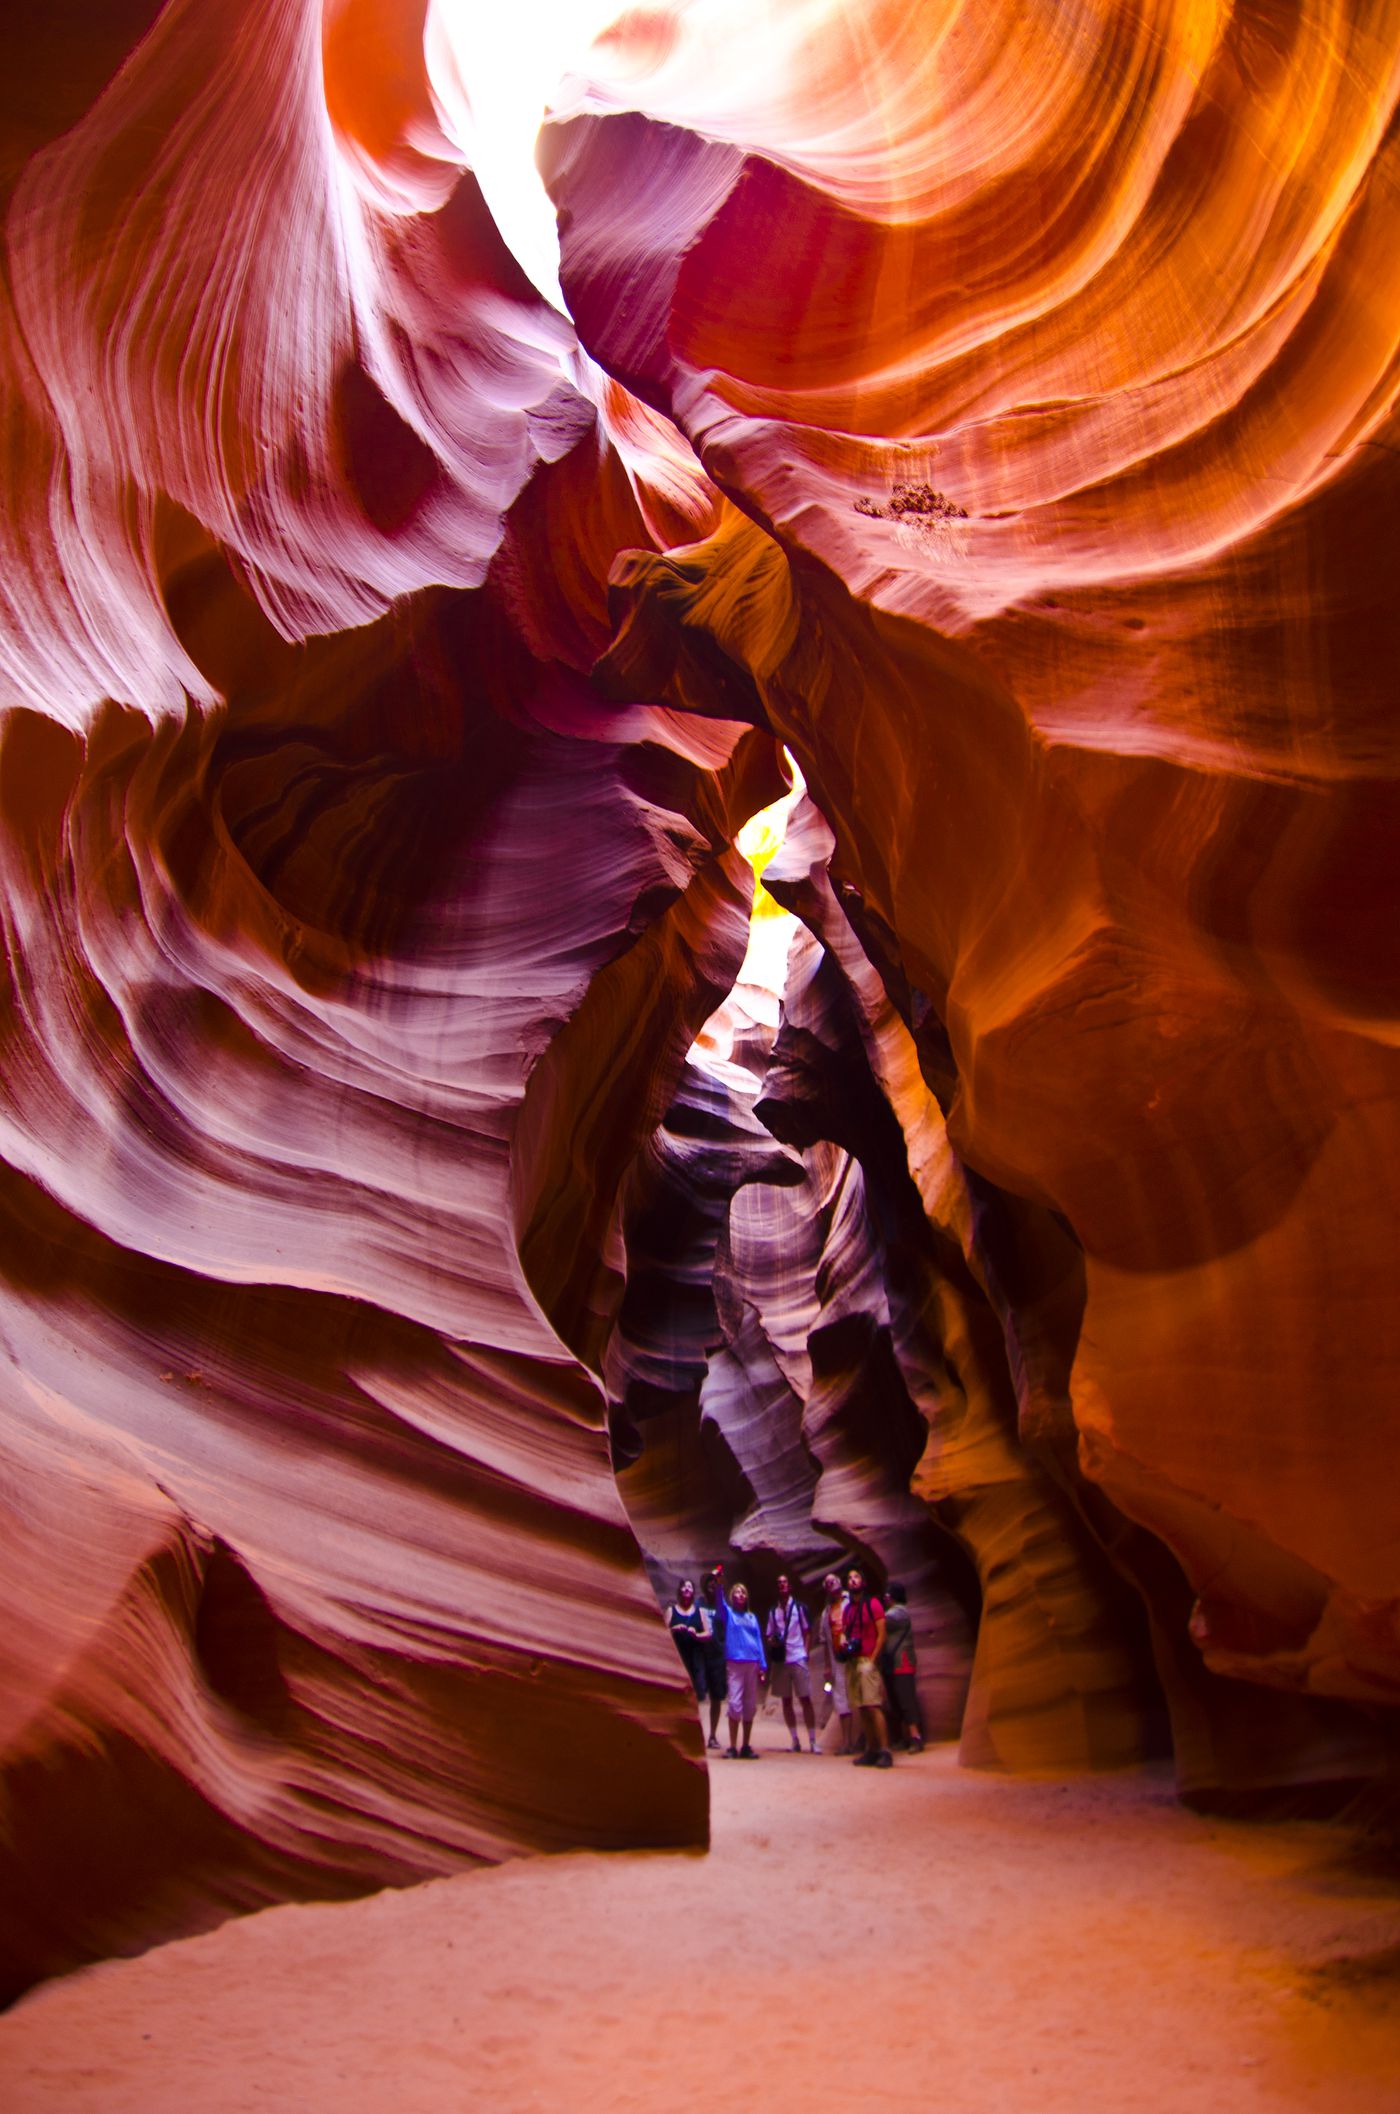 Antelope Canyon, a Navajo natural wonder, adapts to the Instagram age - Vox